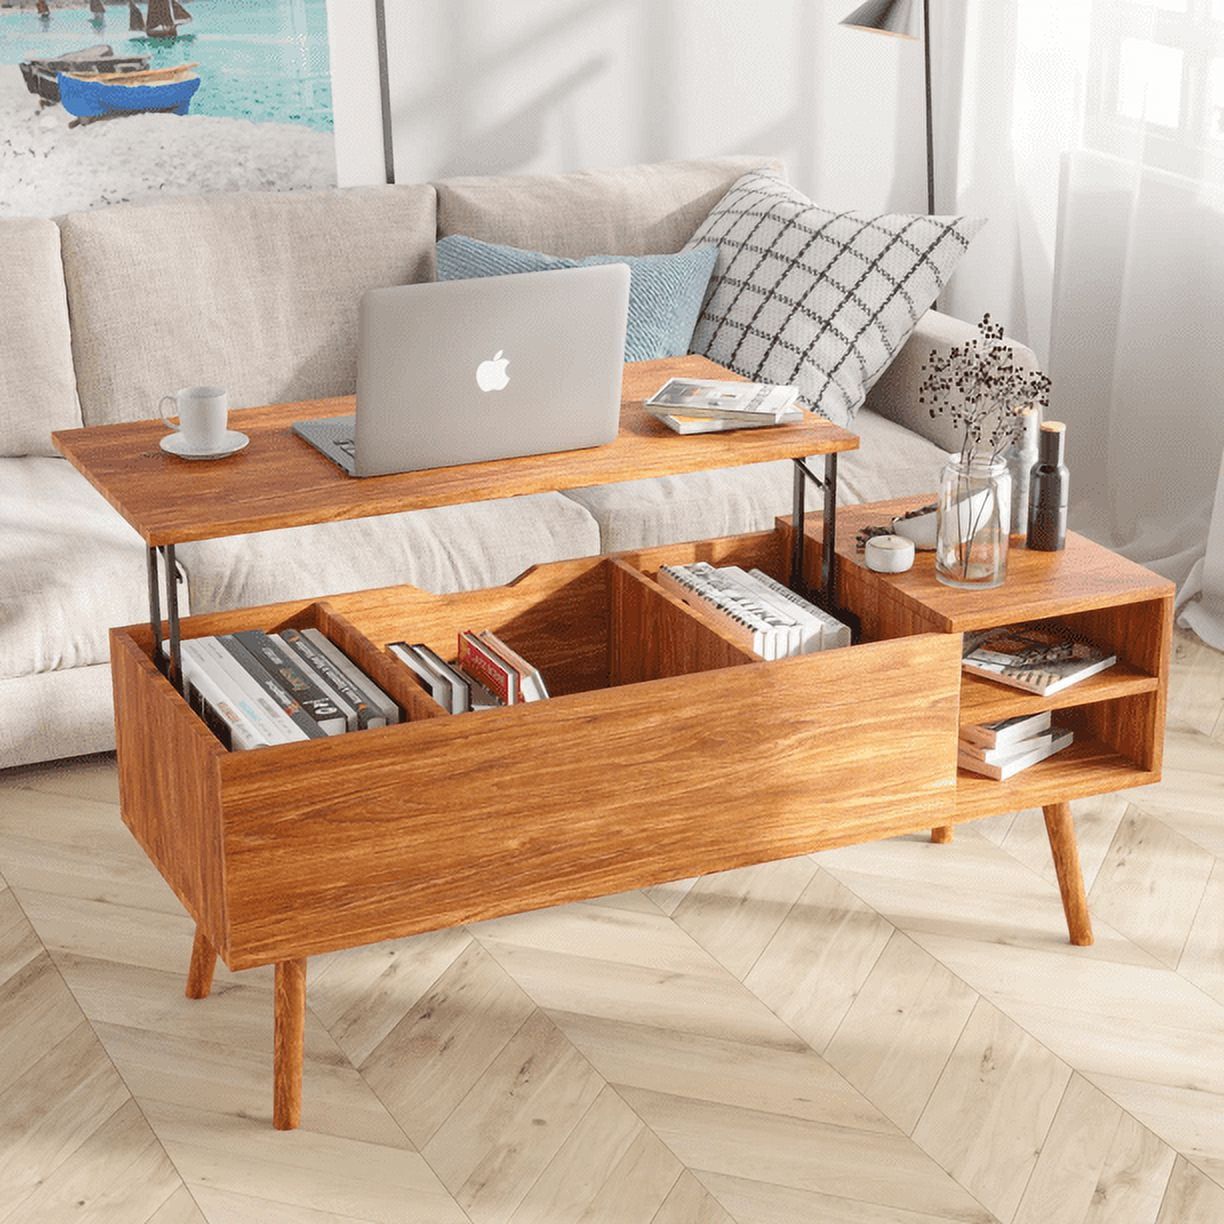 Modern Lift Top Coffee Table With Hidden Compartment Storage,Adjustable  Wood Table For Living Room,Brown – Walmart For Coffee Tables With Hidden Compartments (View 2 of 15)